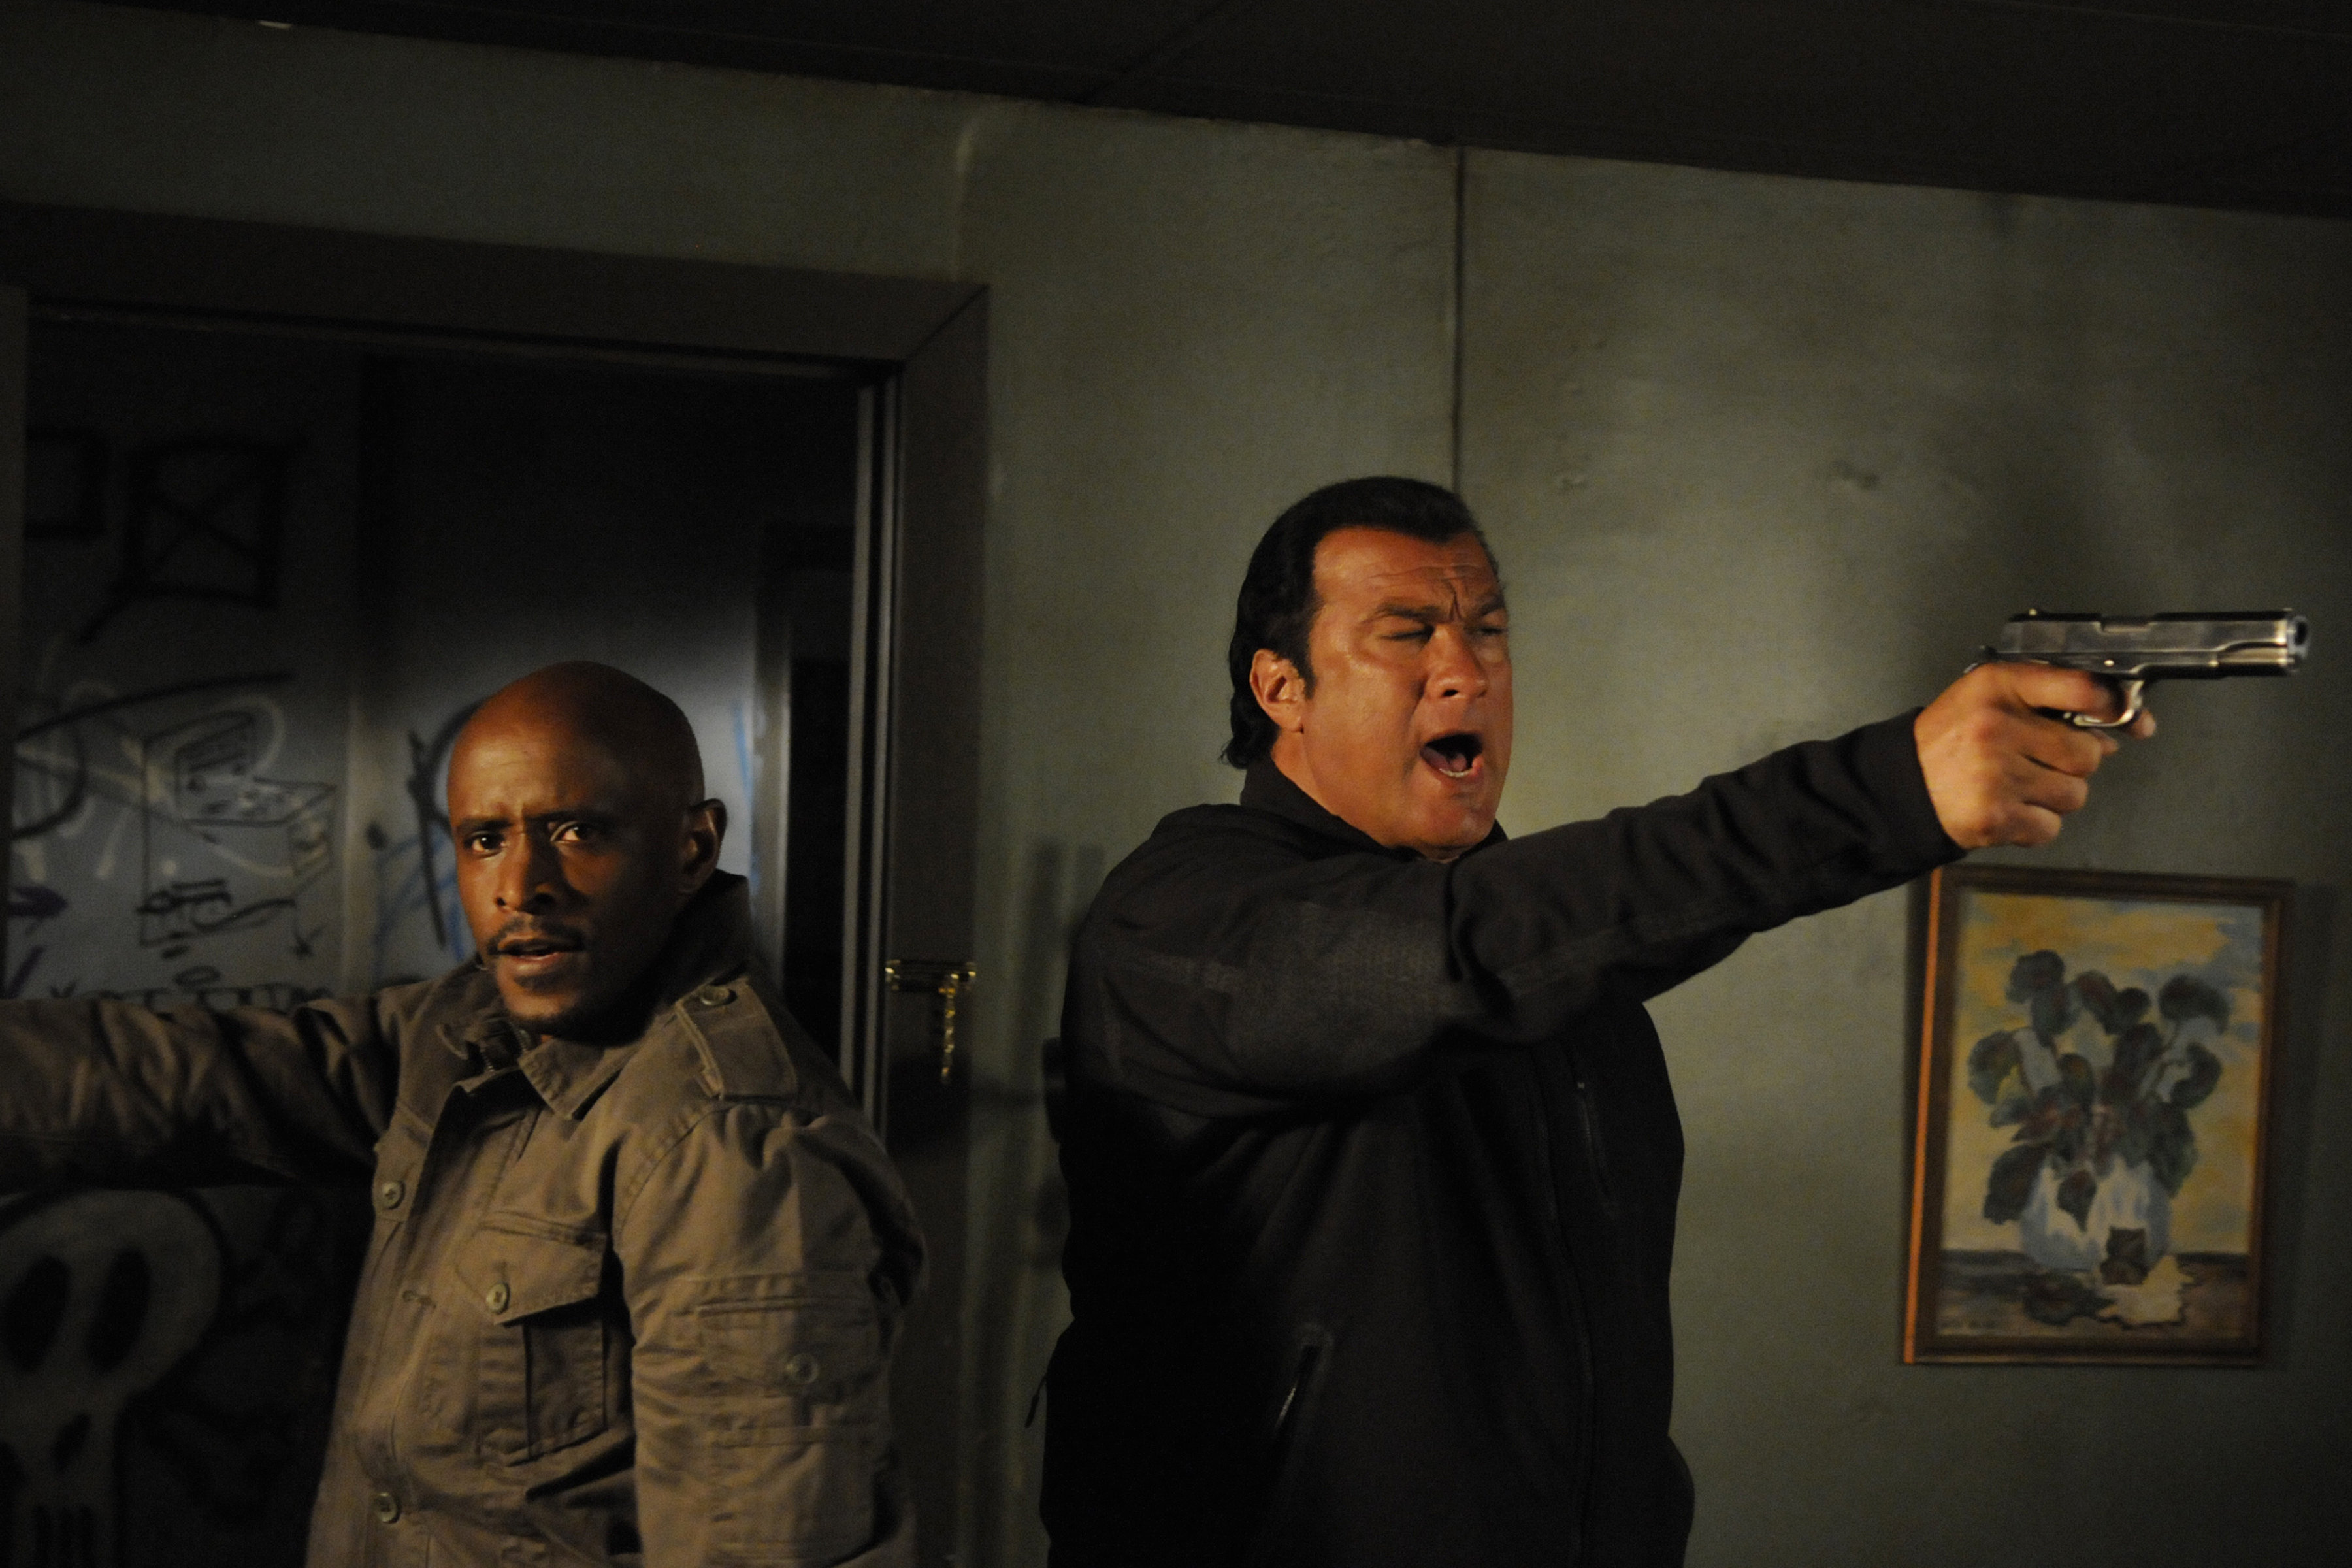 Steven Seagal and Brian Keith Gamble in The Keeper (2009)